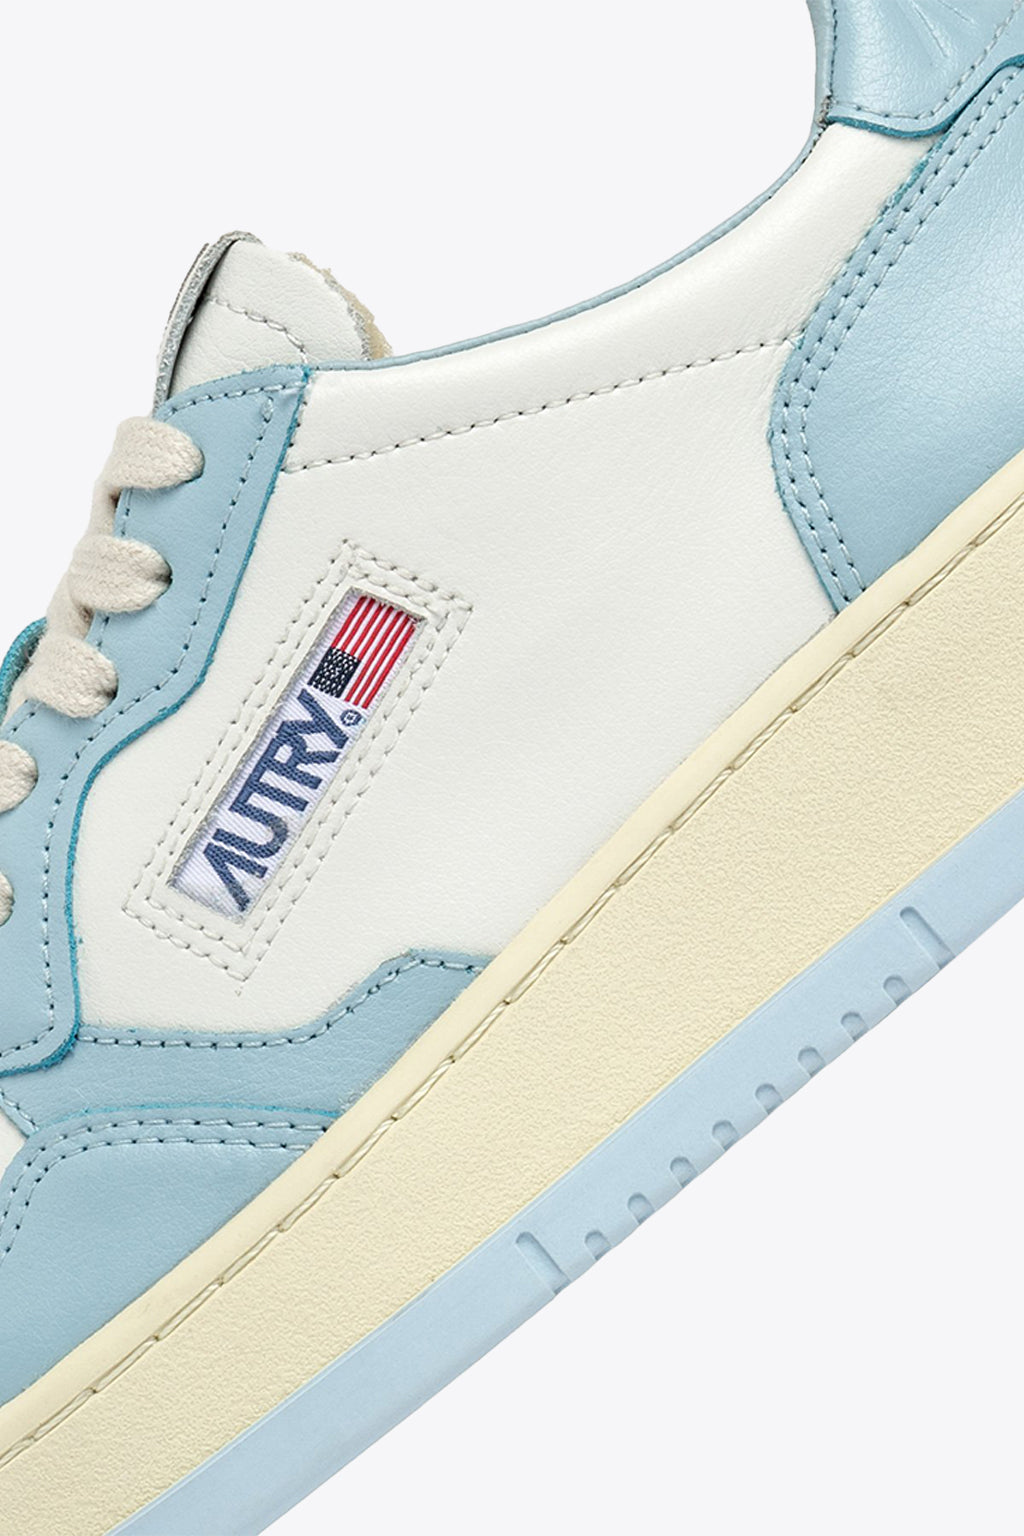 alt-image__Light-blue-and-white-leather-low-sneaker---Medalist